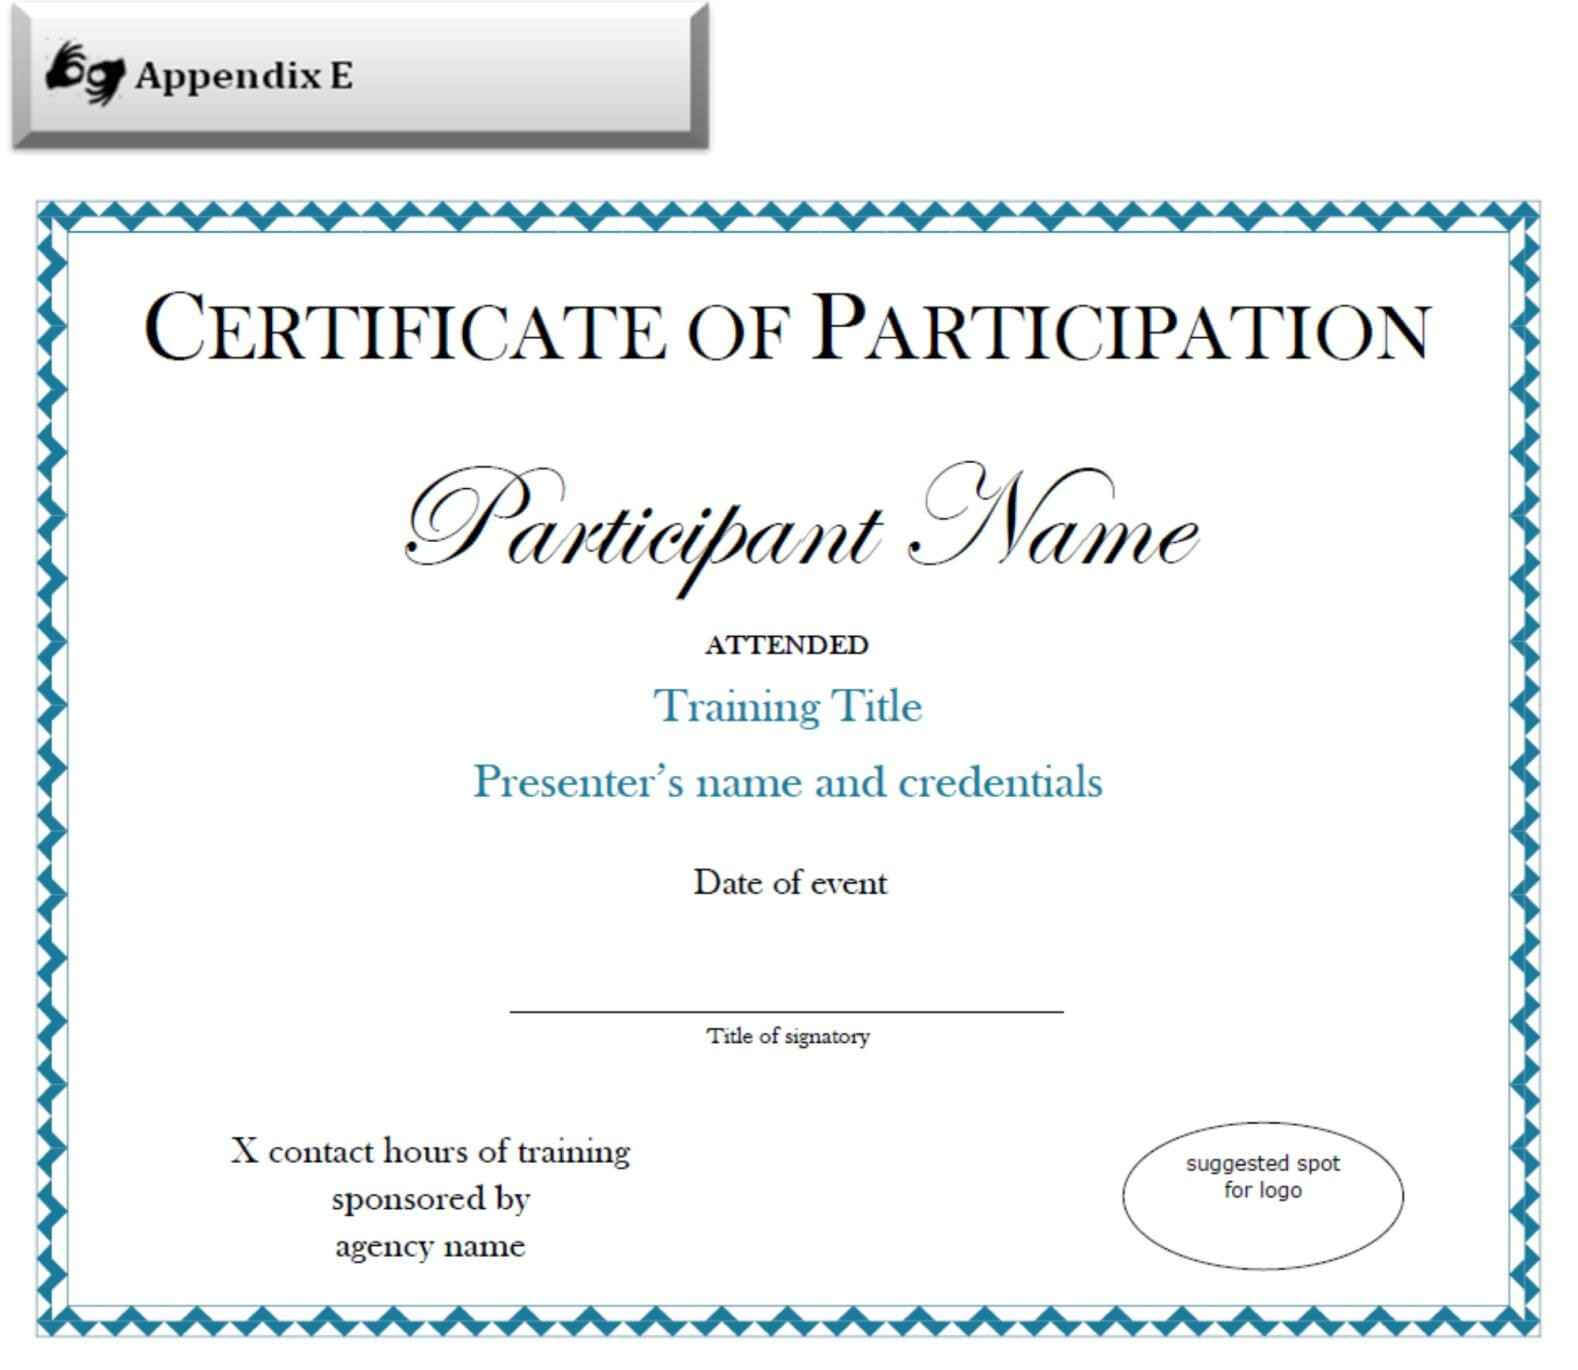 Sample Certificate Of Participation Template Regarding Sample Certificate Of Participation Template